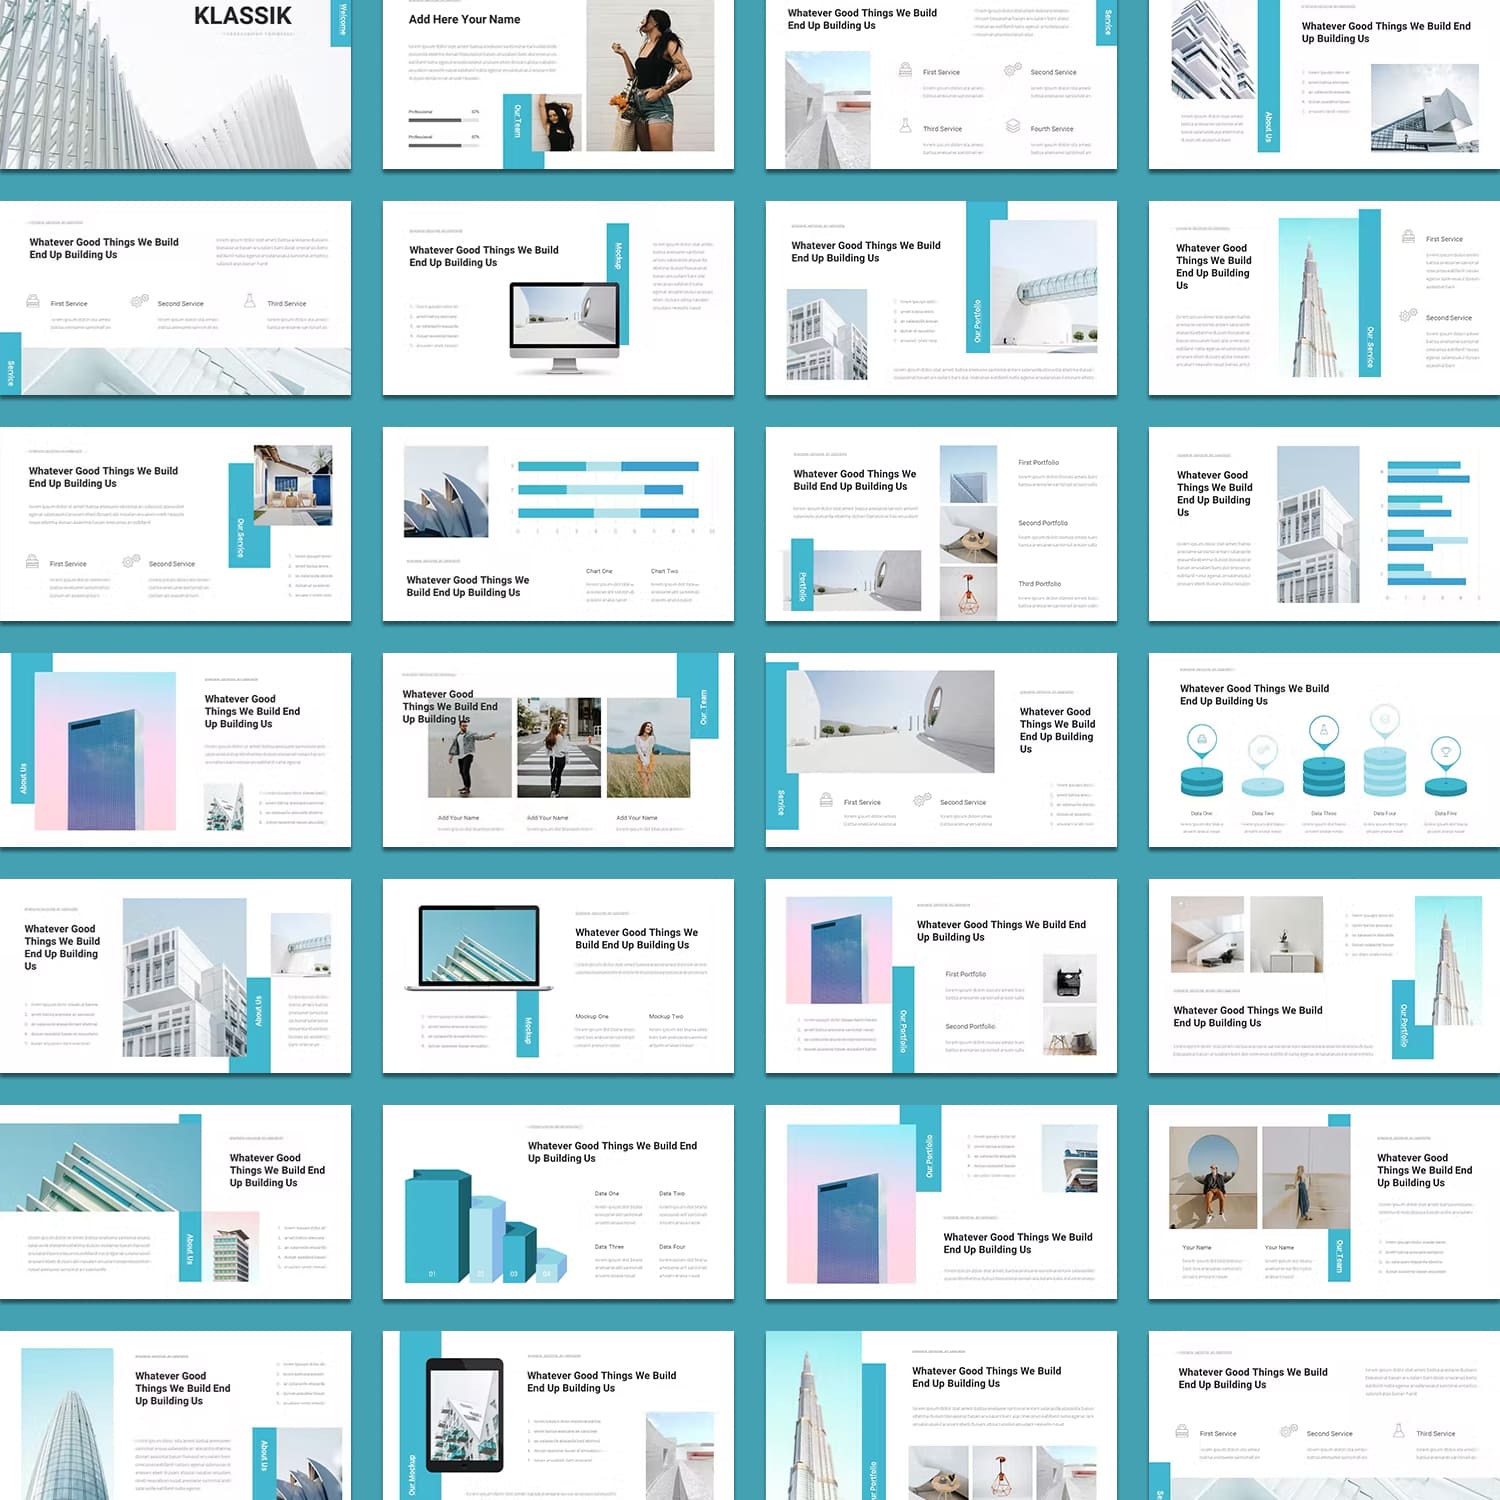 Klassik architecture powerpoint template created by naulicrea.